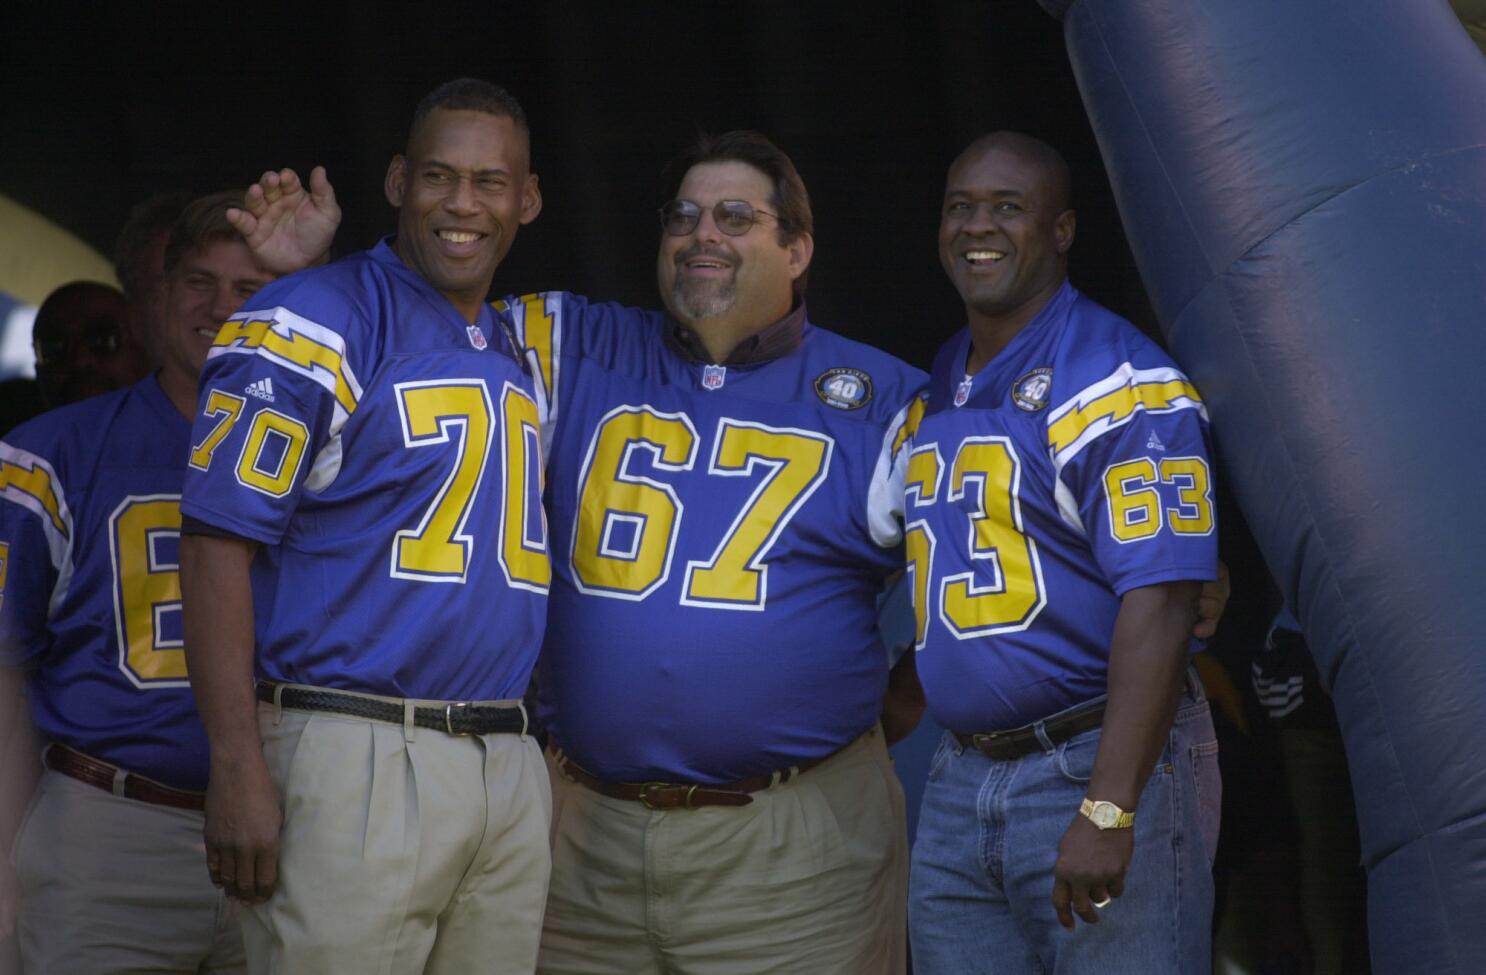 Russ Washington, member of Chargers Hall of Fame, dies at 74 - The